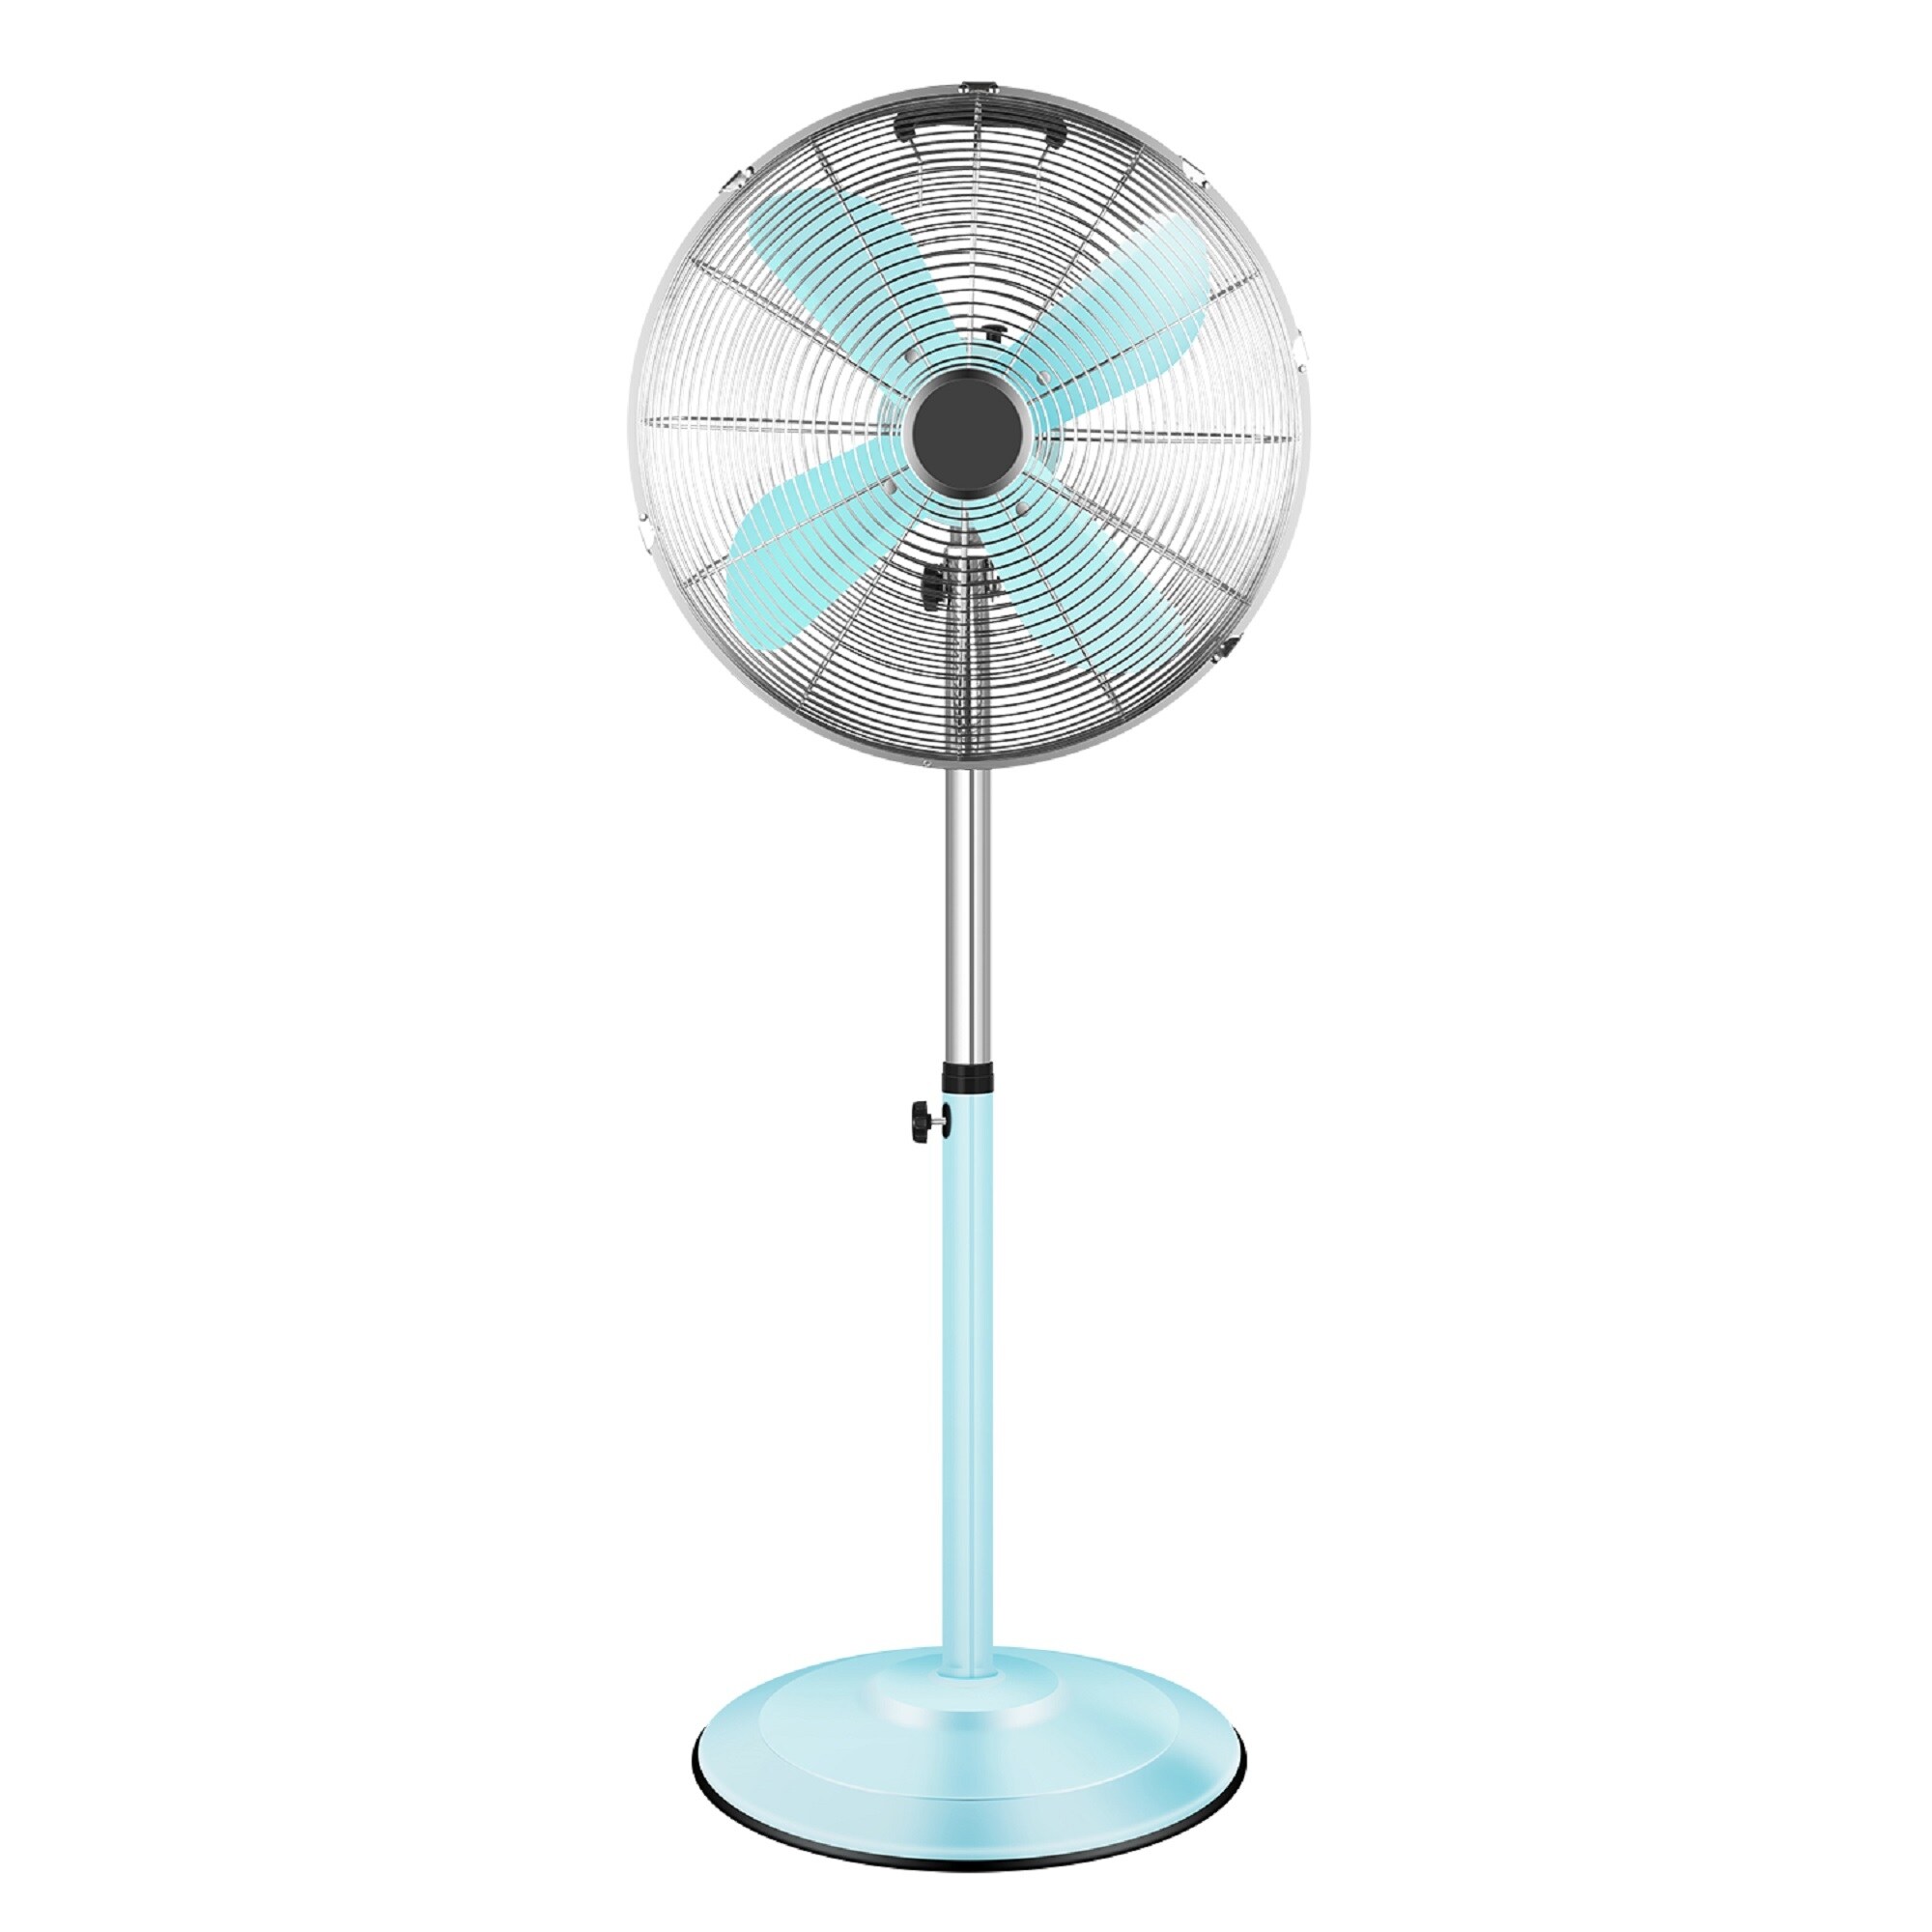 Premium Metal Stand Fan with Adjustable Height Low Noise Operation Bed  Bath  Beyond 38149151